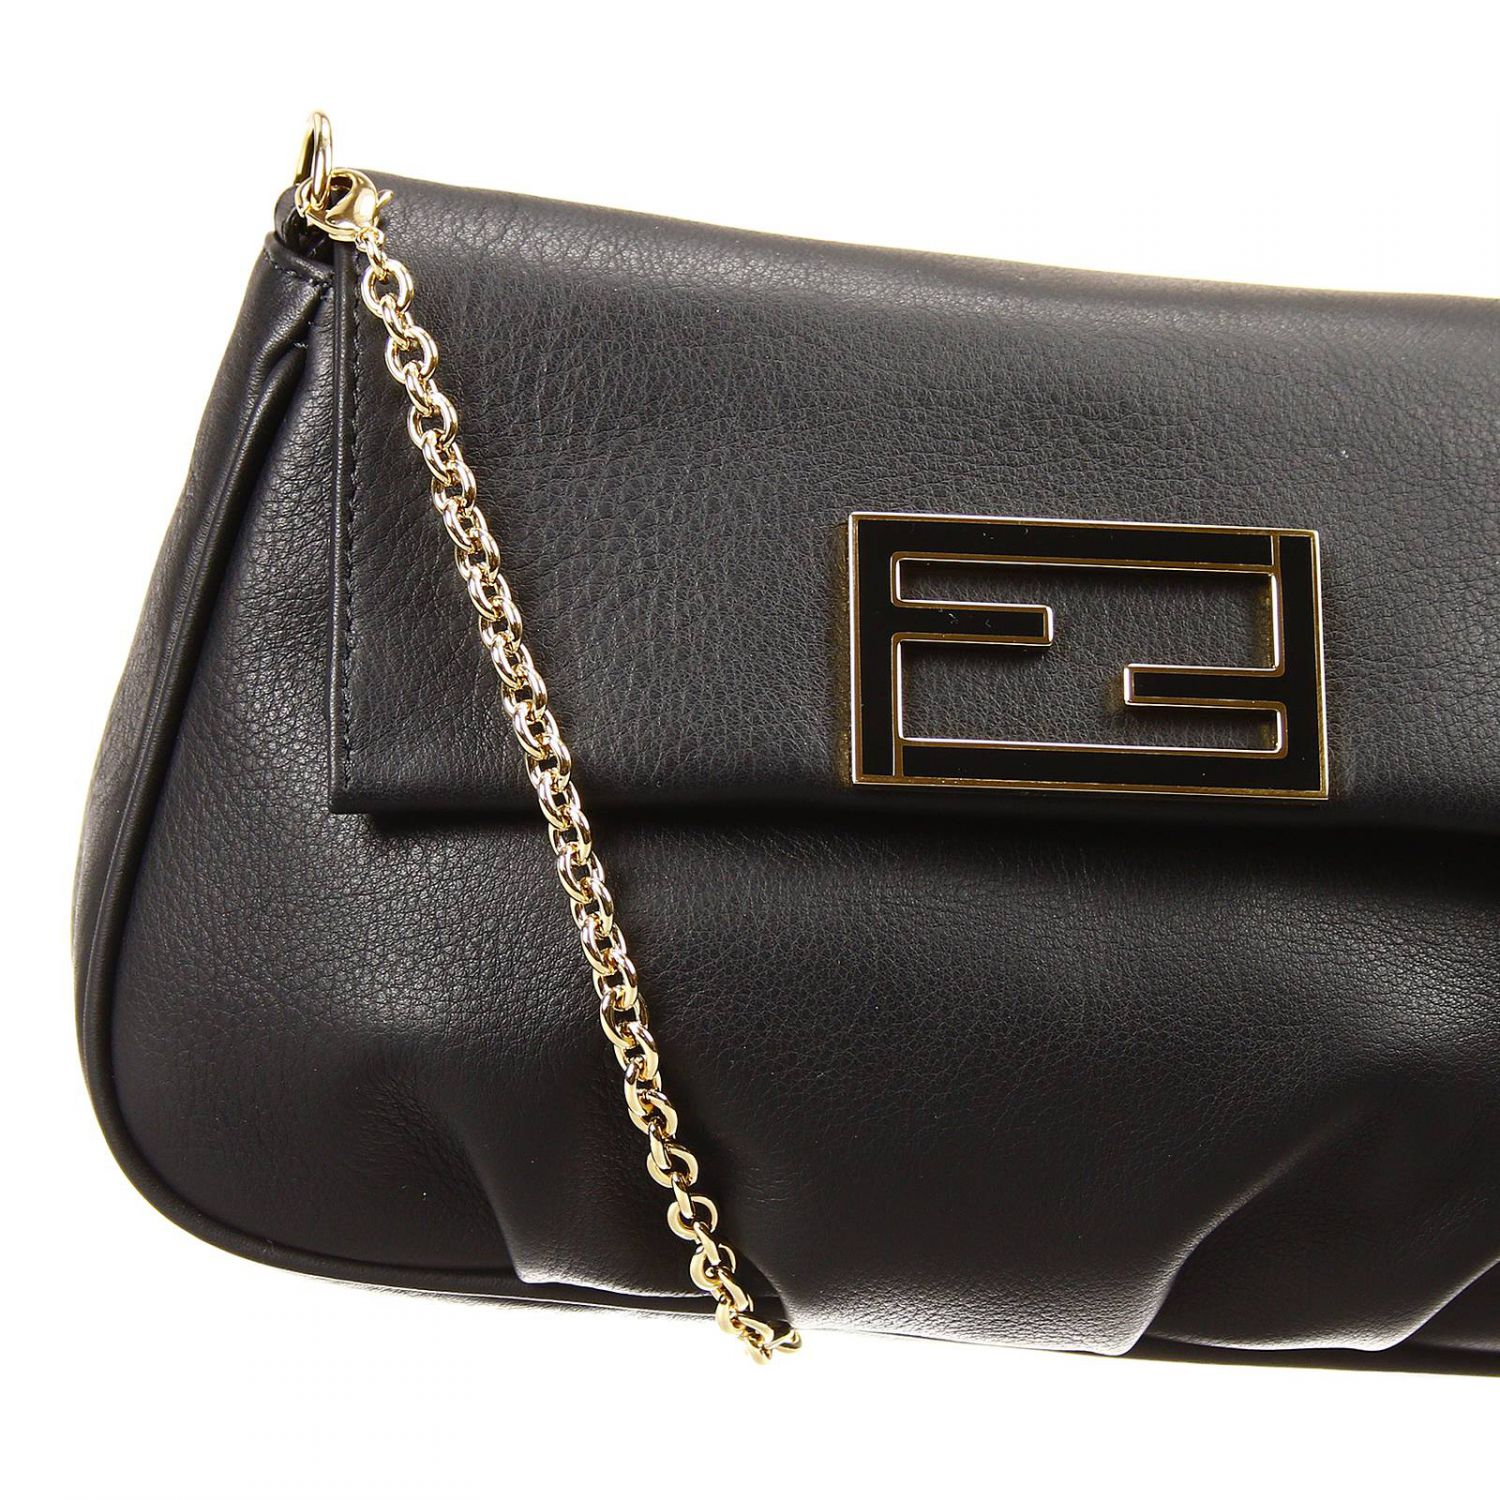 Fendi Clutch Bag Mini The Sta Crossbody Leather With Chain in Black (Black out of stock) | Lyst